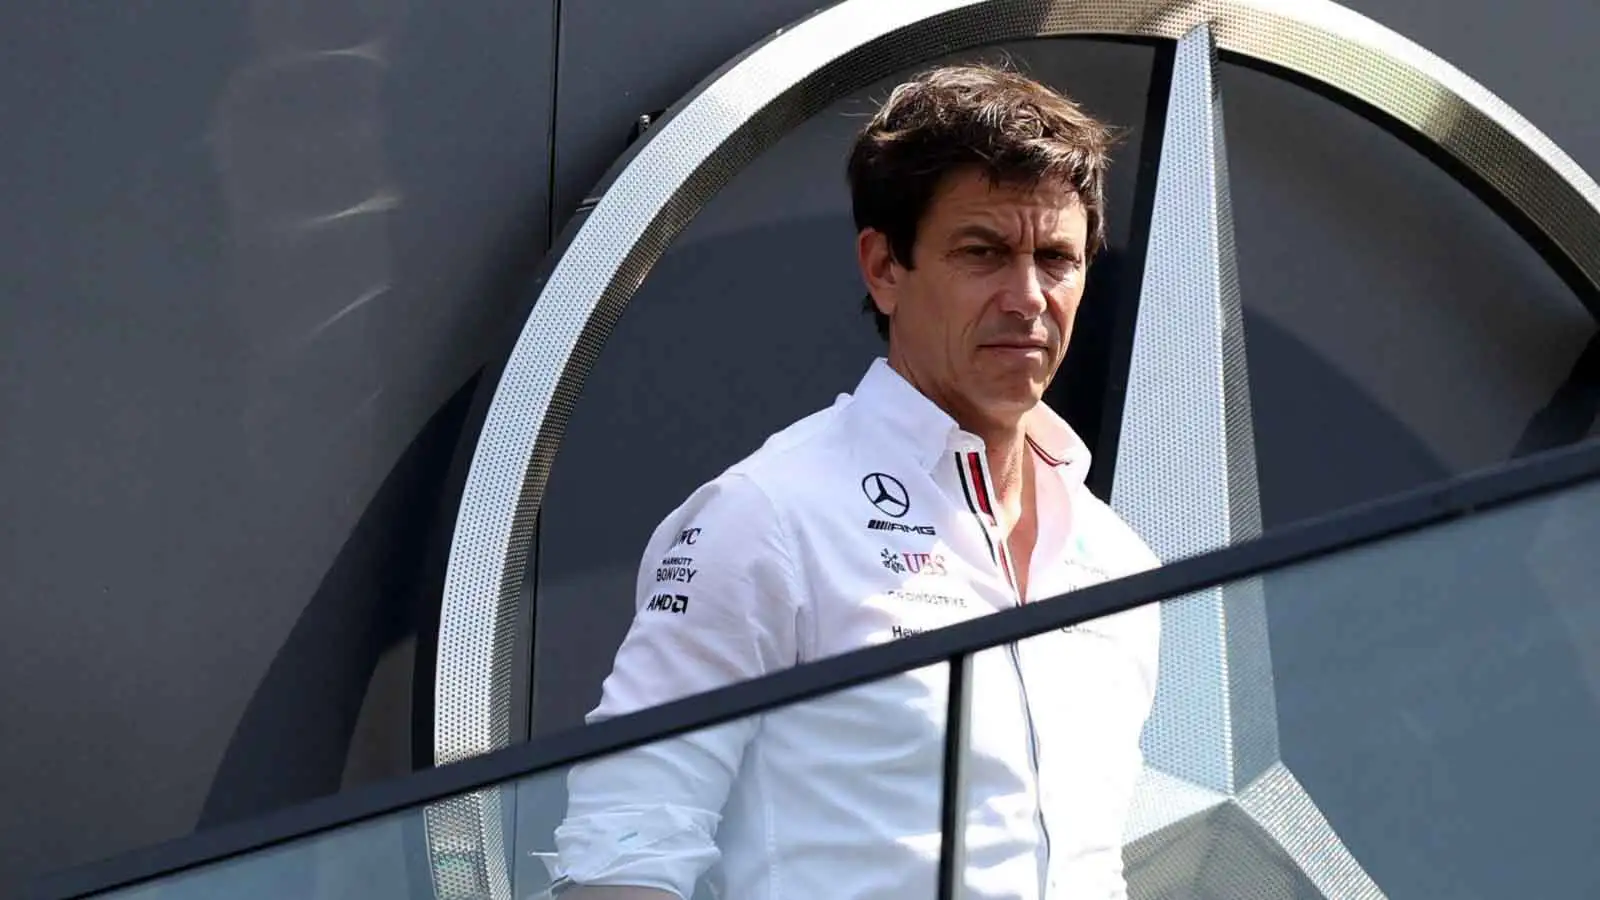 Mercedes team principal Toto Wolff on a balcony. Hungary July 2022.